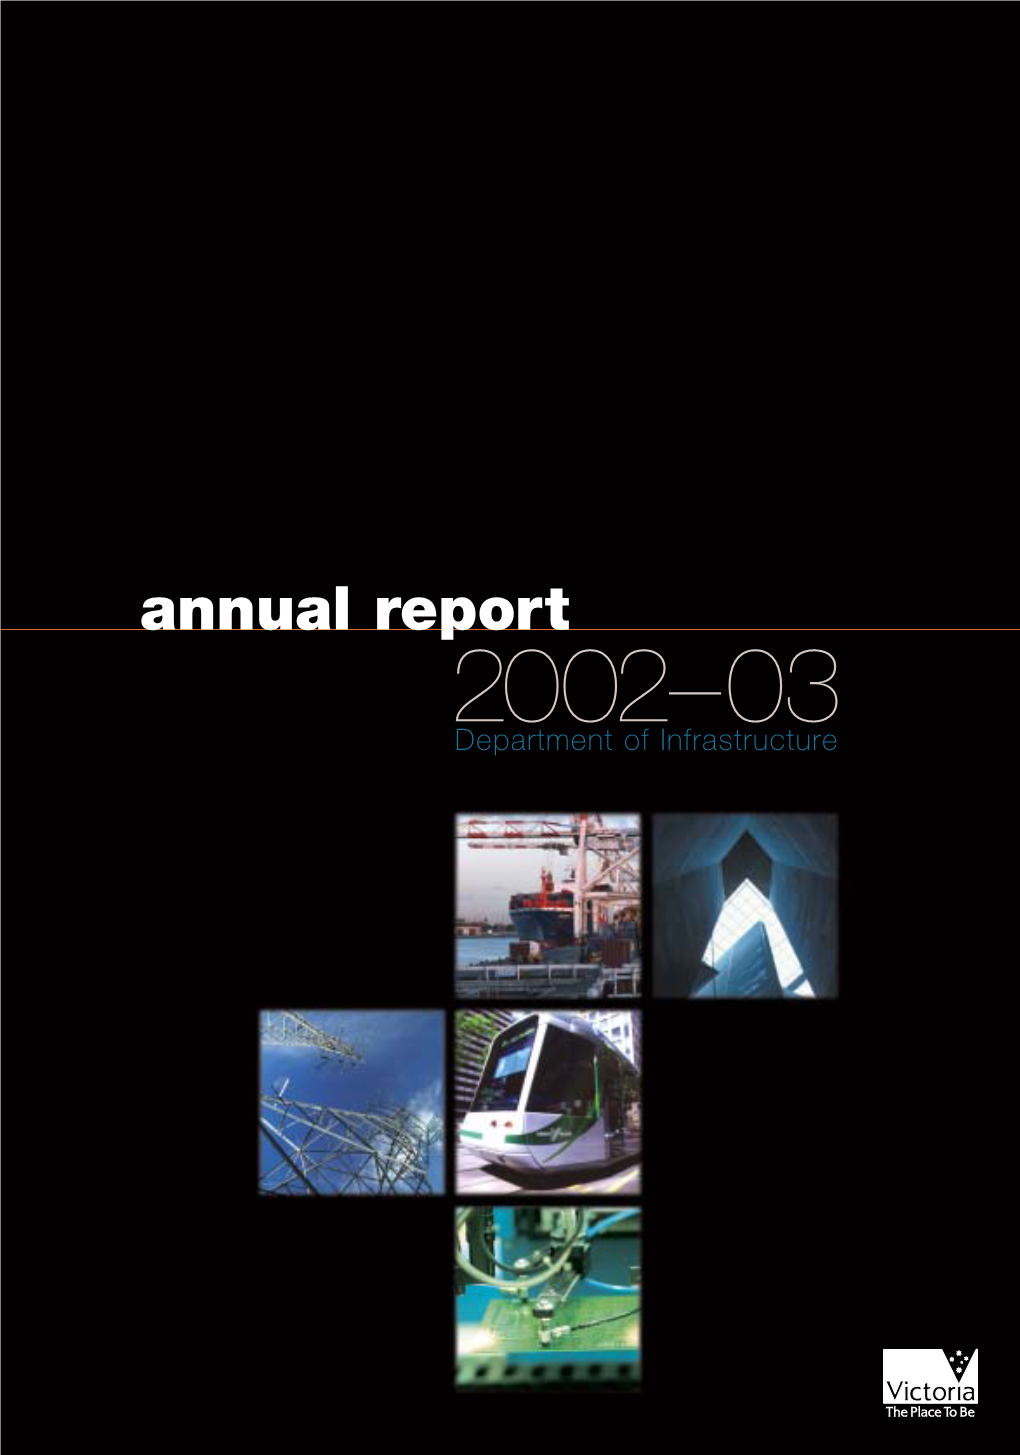 Department of Infrastructure Annual Report 2002-2003